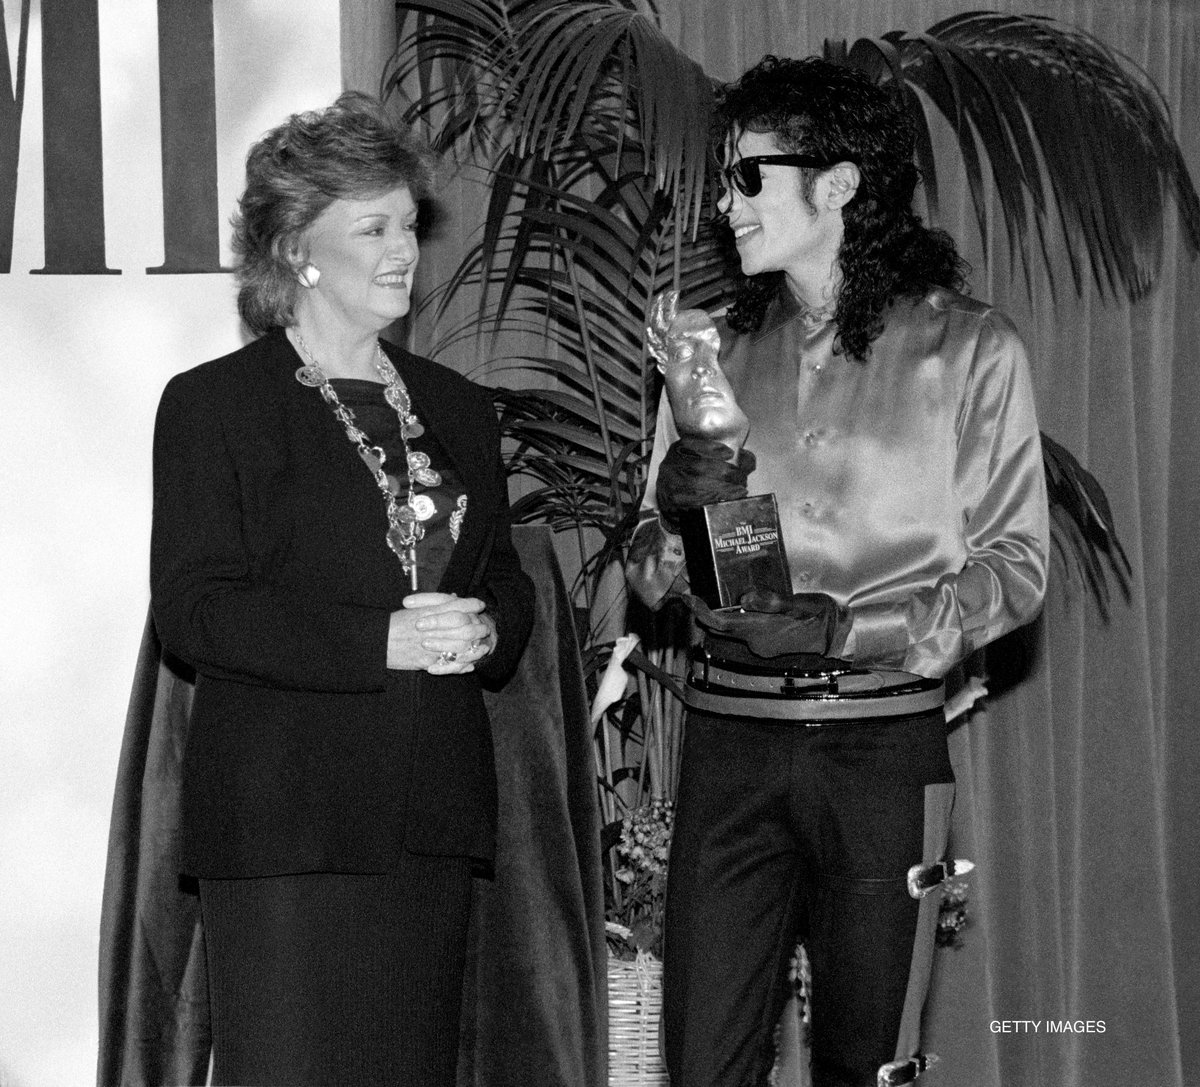 On this date in 1990, Michael received BMI’s inaugural Michael Jackson Award. The performance rights organization recognized Michael for his humanitarian efforts, as well as for his songwriting, recording and performing contributions. #MJHumanitarian